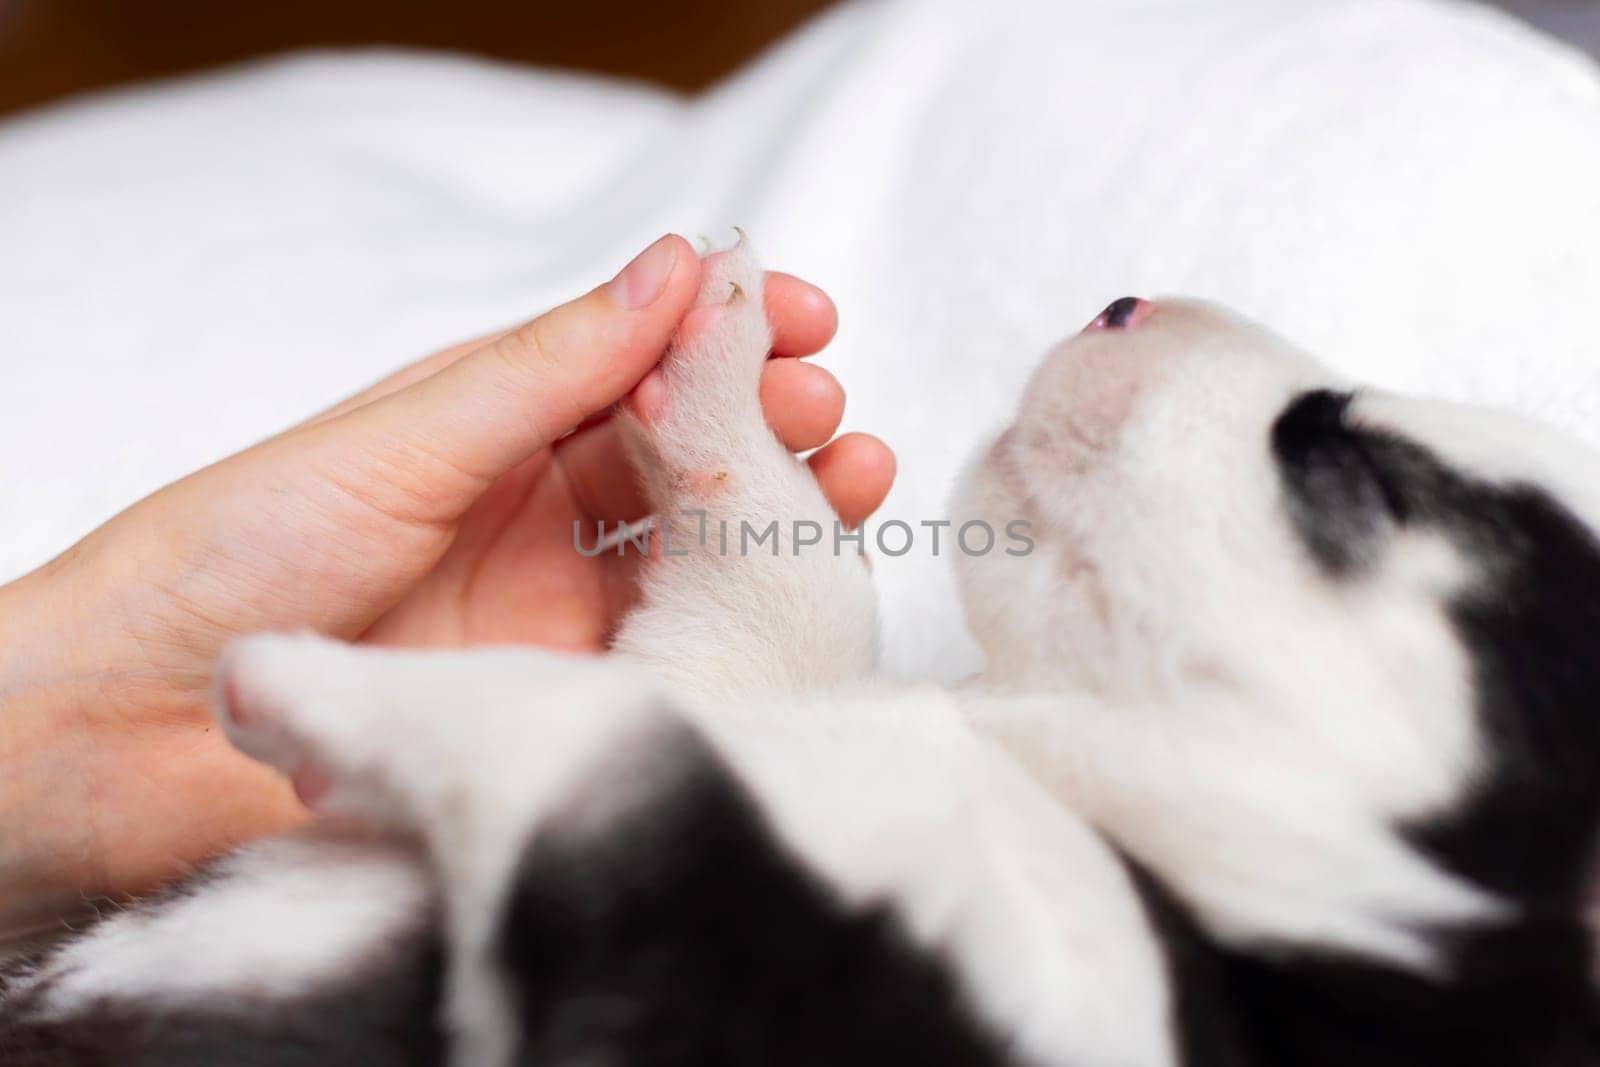 A close-up view of a tender moment where a human gently holds a puppy's paw, emphasising the bond between pet owner and pet